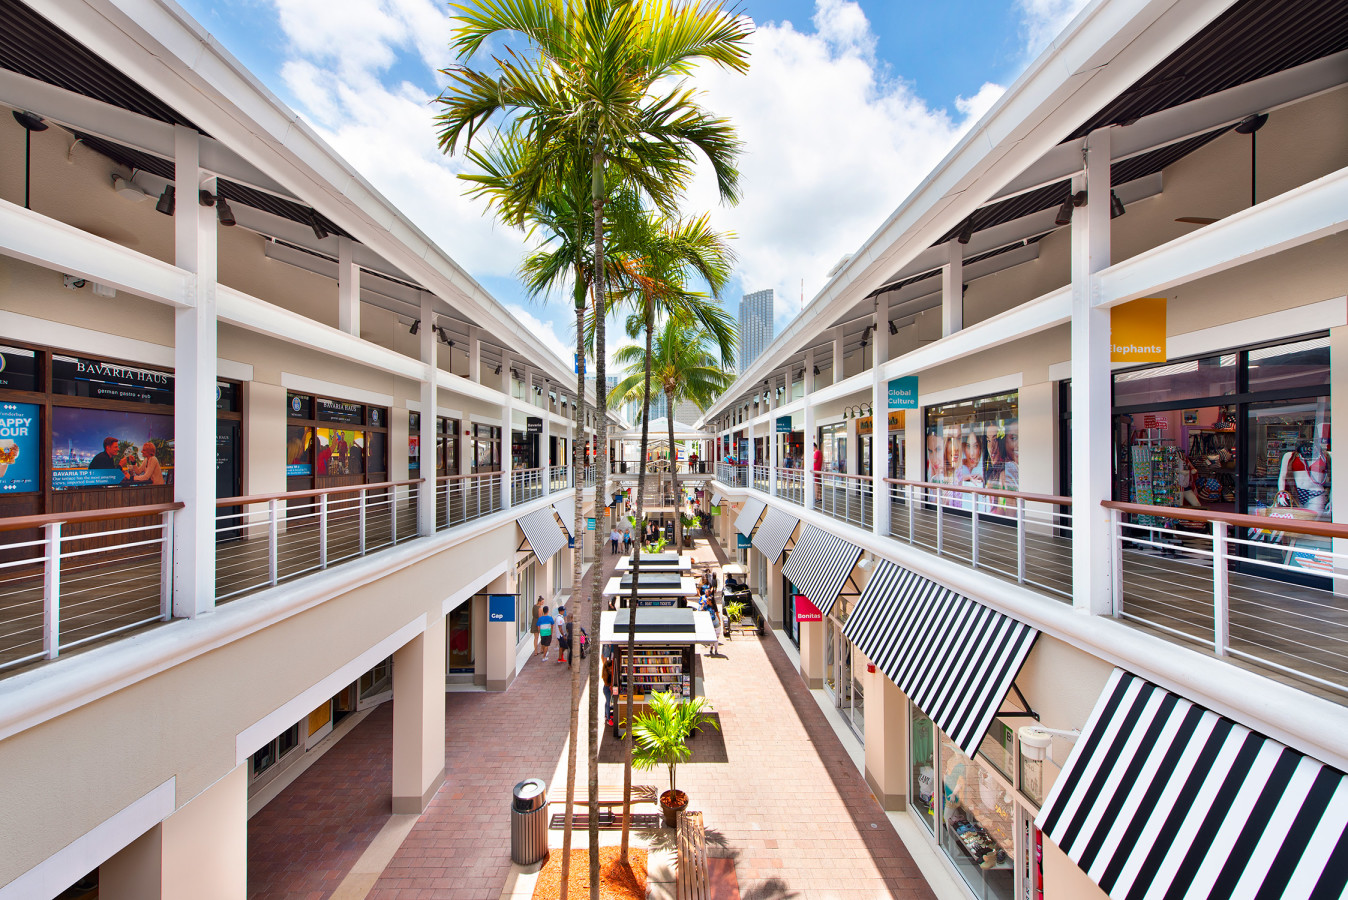 Bayside Market Place in Miami, Florida